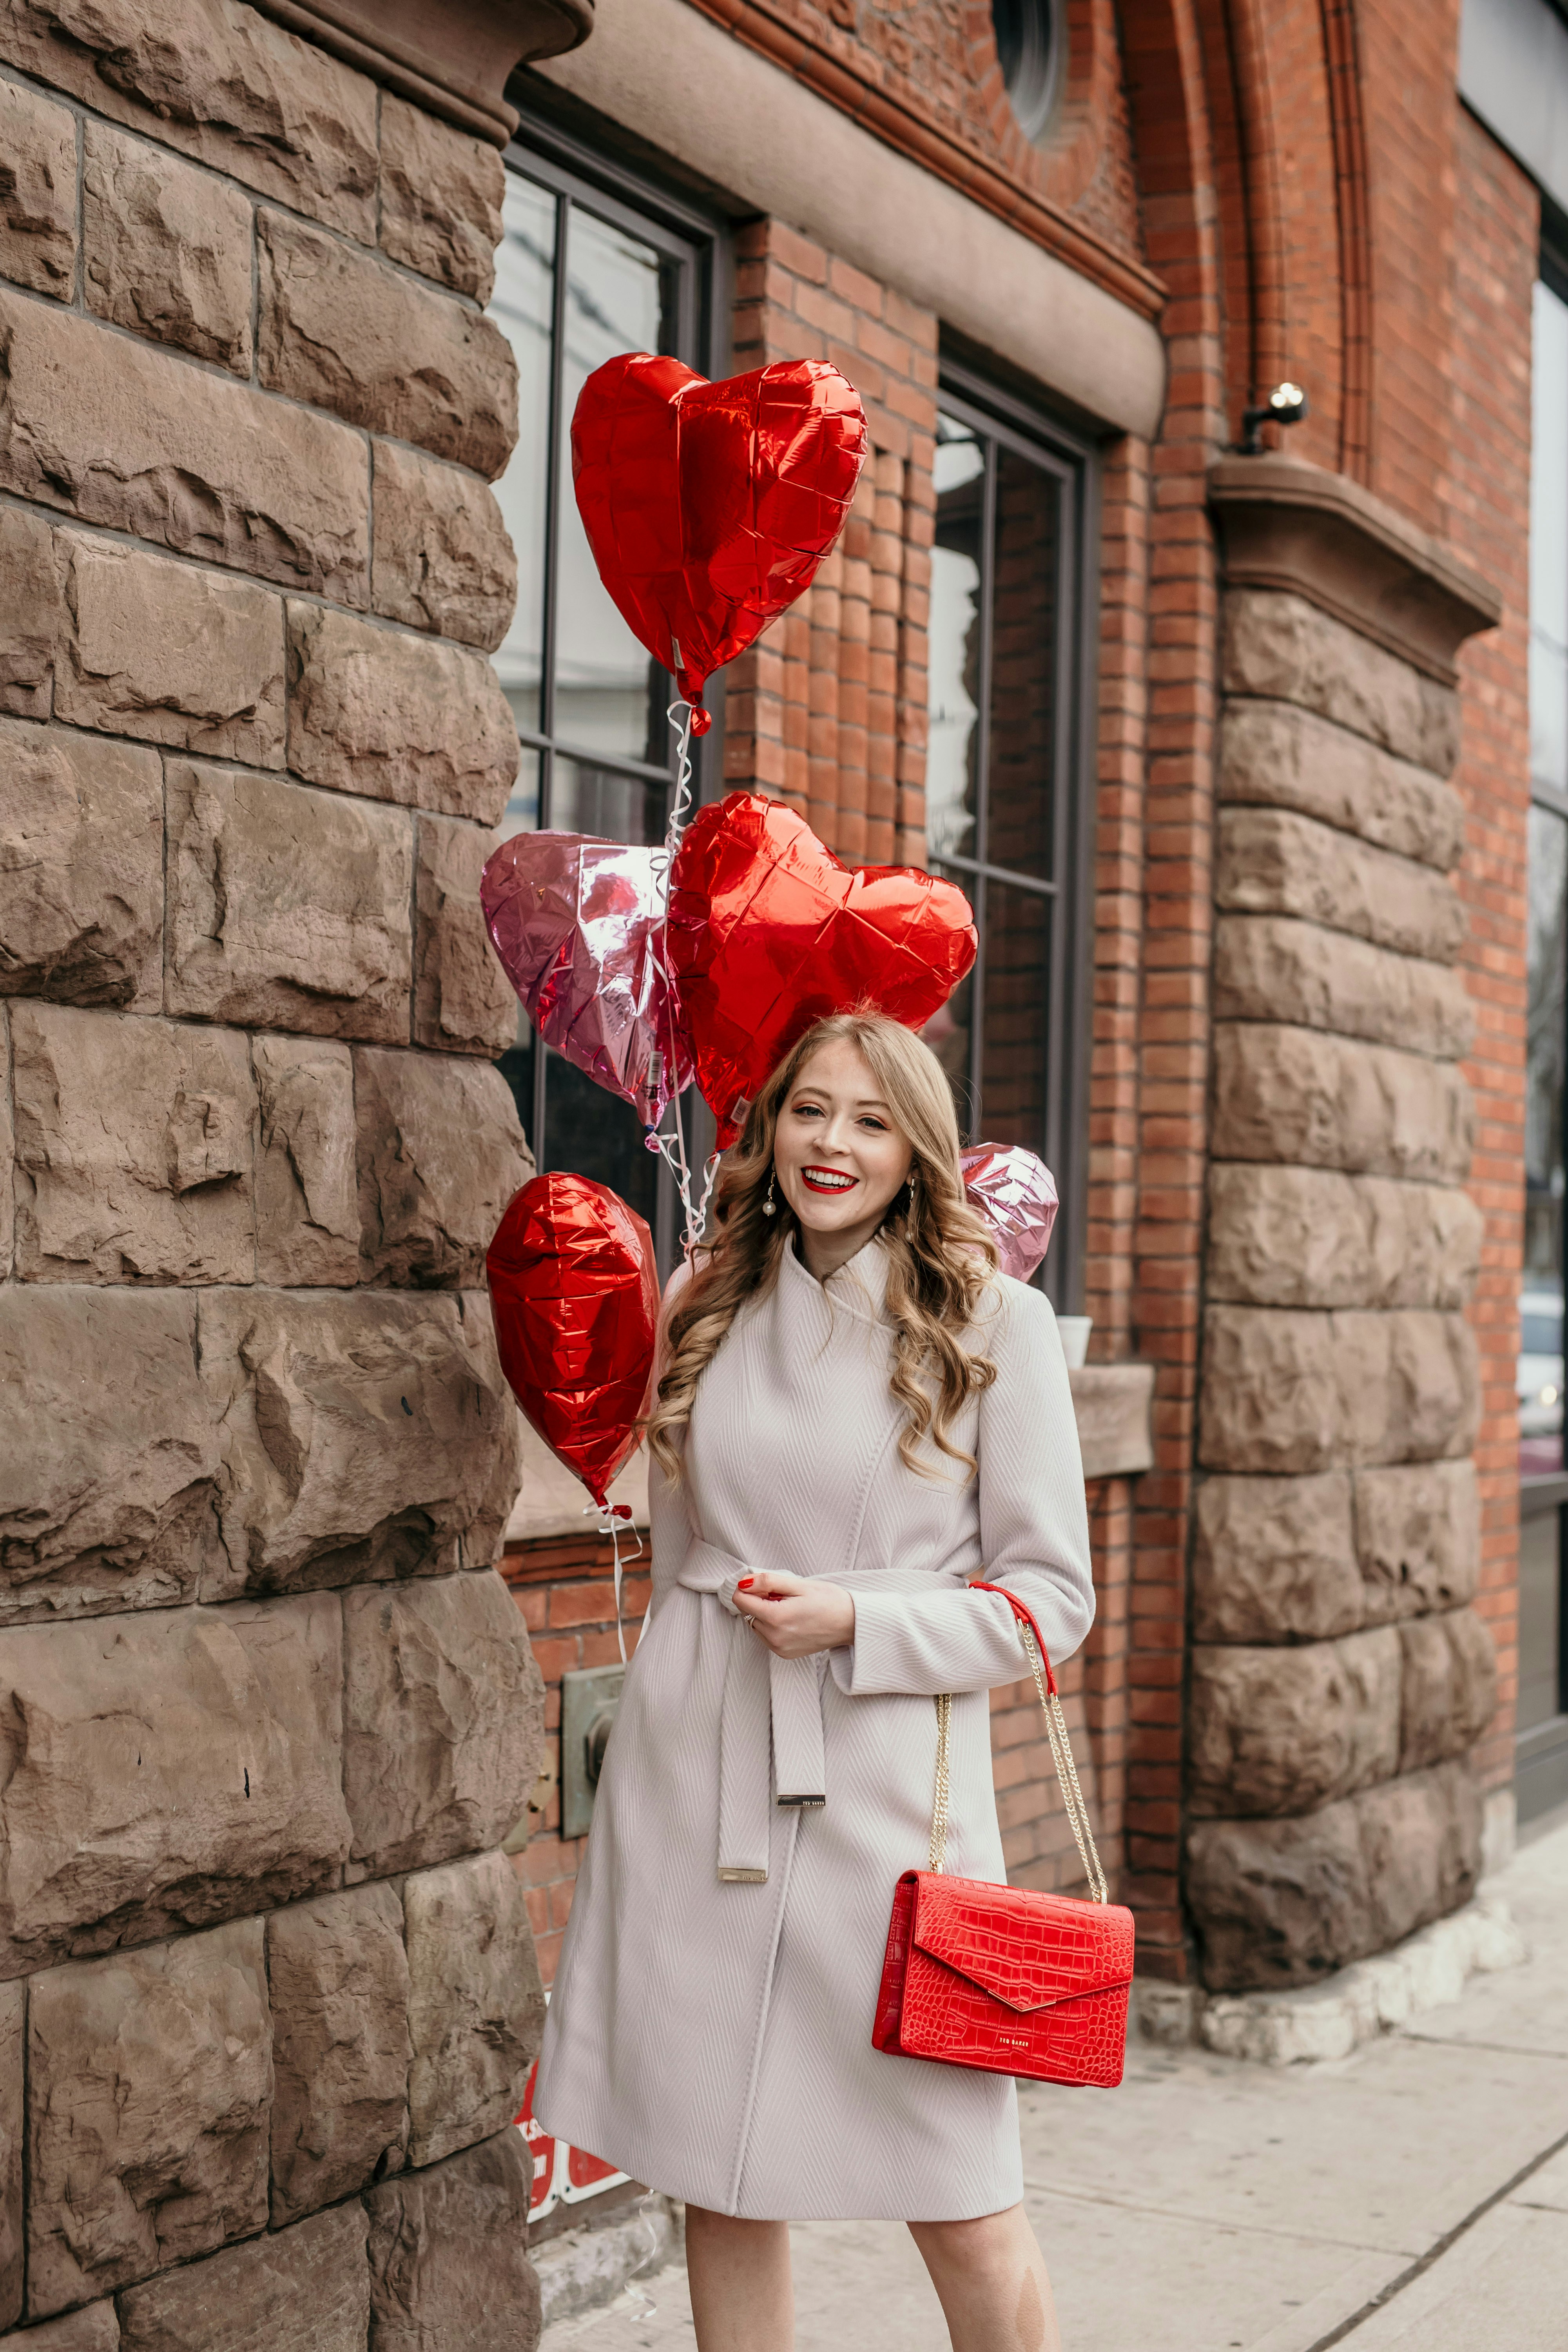 Ted Baker Beleeni Wool Wrap Coat: this chic light mauve coat is so elegant and feminine. Paired with a red croc embossed envelope bag from Ted Baker, this look is perfect for Valentine's Day!